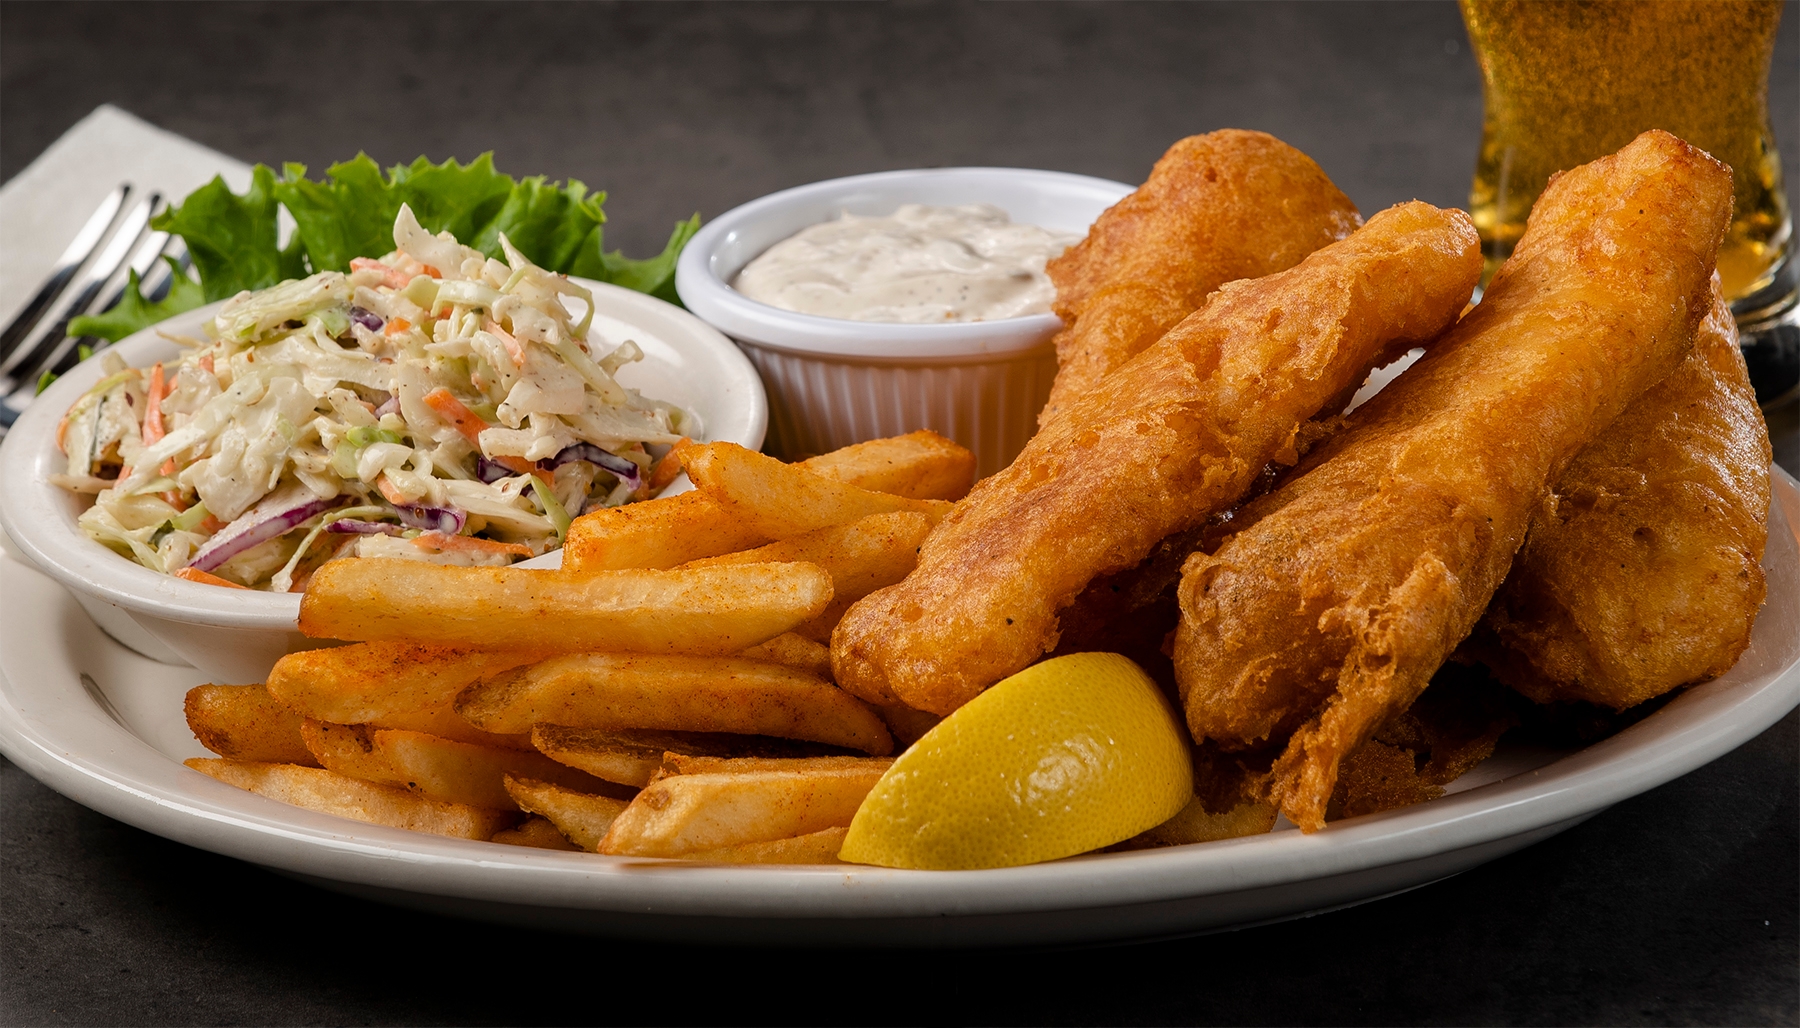 Wild caught North Atlantic cod fillets, beer battered and fried crispy, with tartar sauce, cole slaw and seasoned fries. 1040 cal.